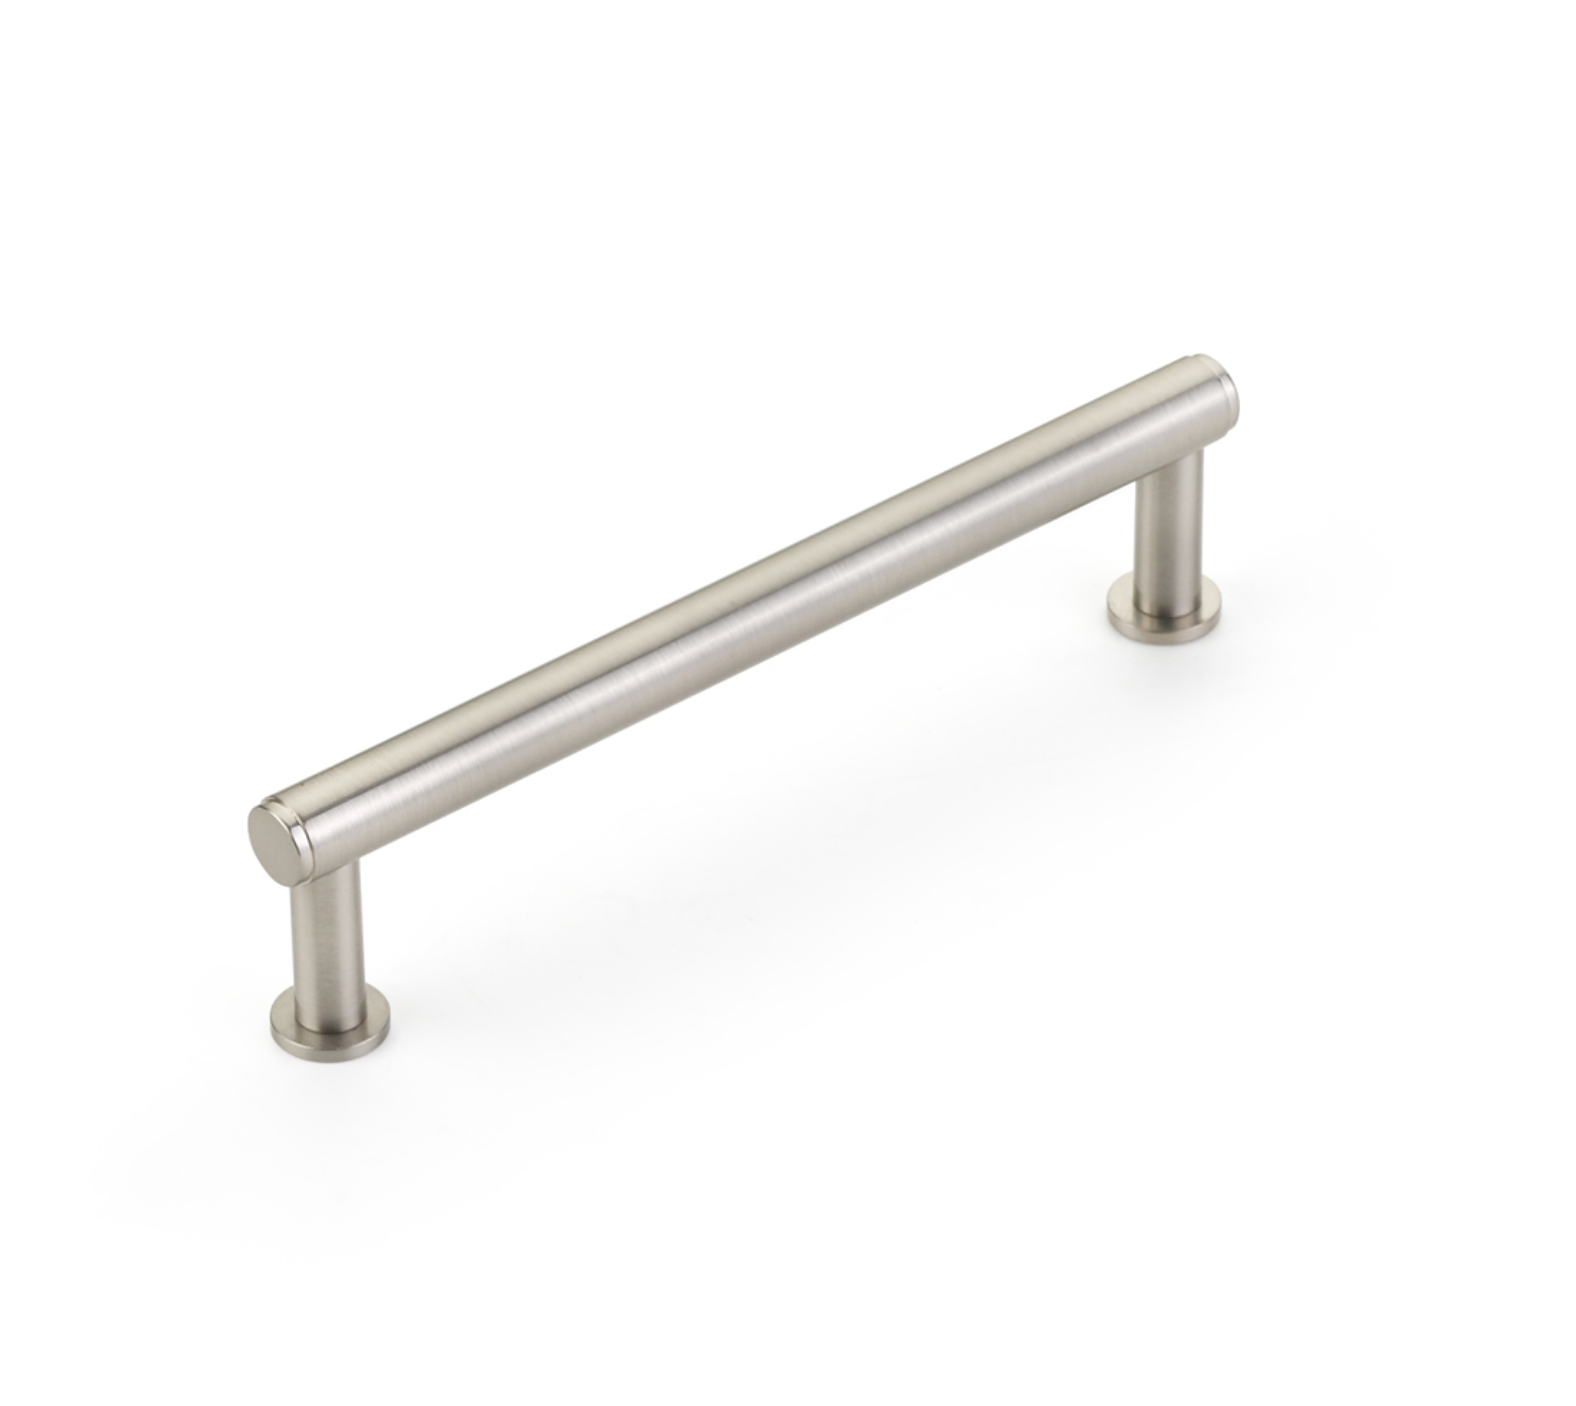 Brushed Nickel "Maison No. 2" Smooth Drawer Pulls and Cabinet Knobs with Optional Backplate - Industry Hardware